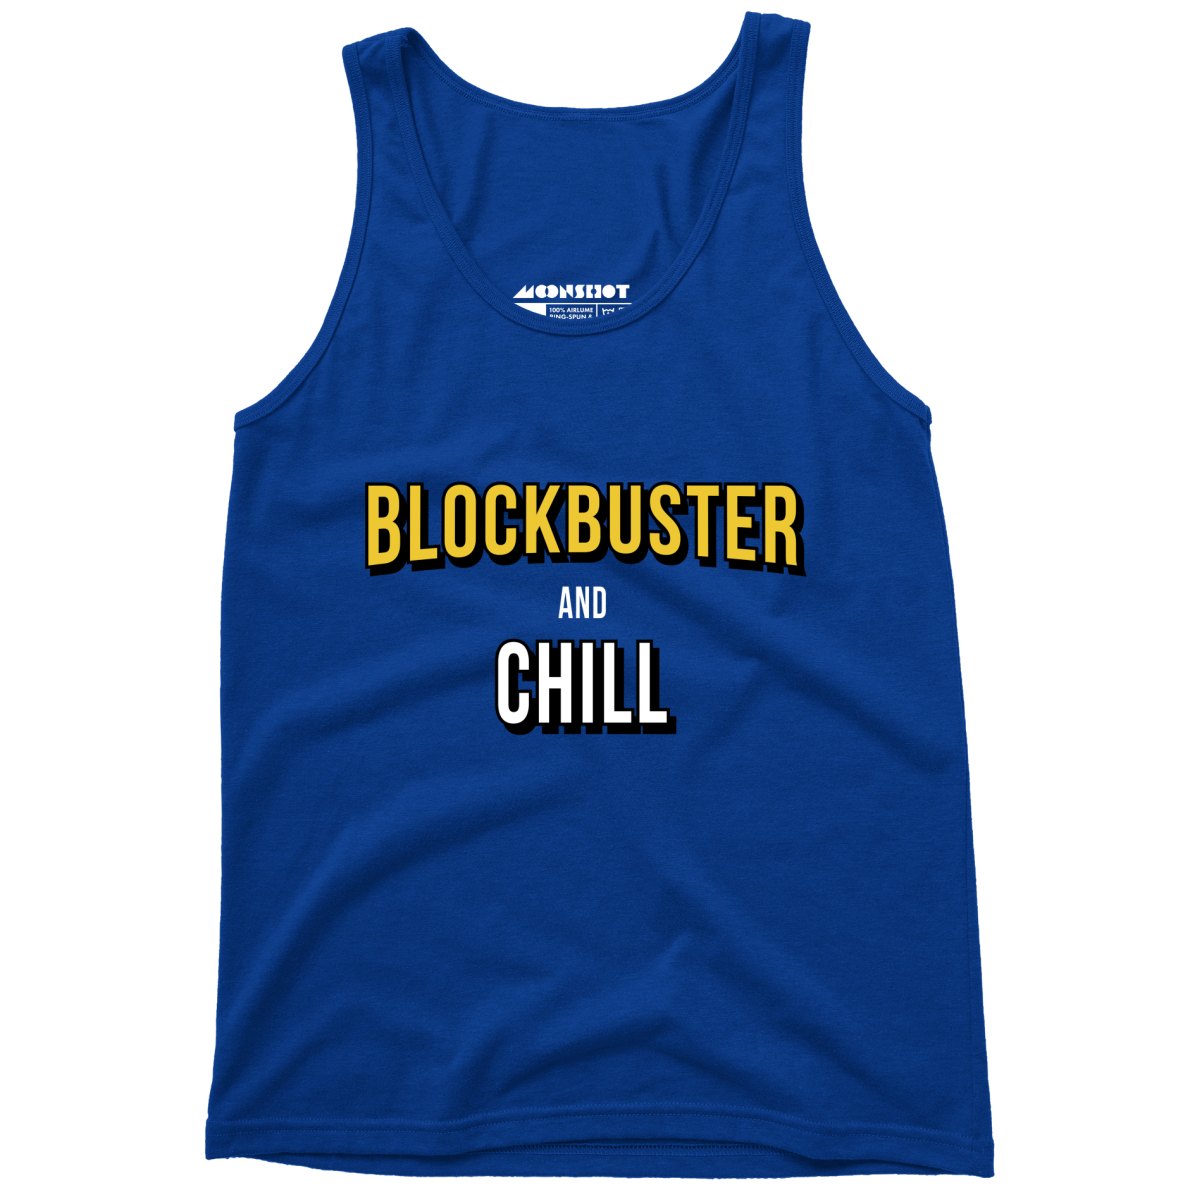 Blockbuster and Chill - Unisex Tank Top